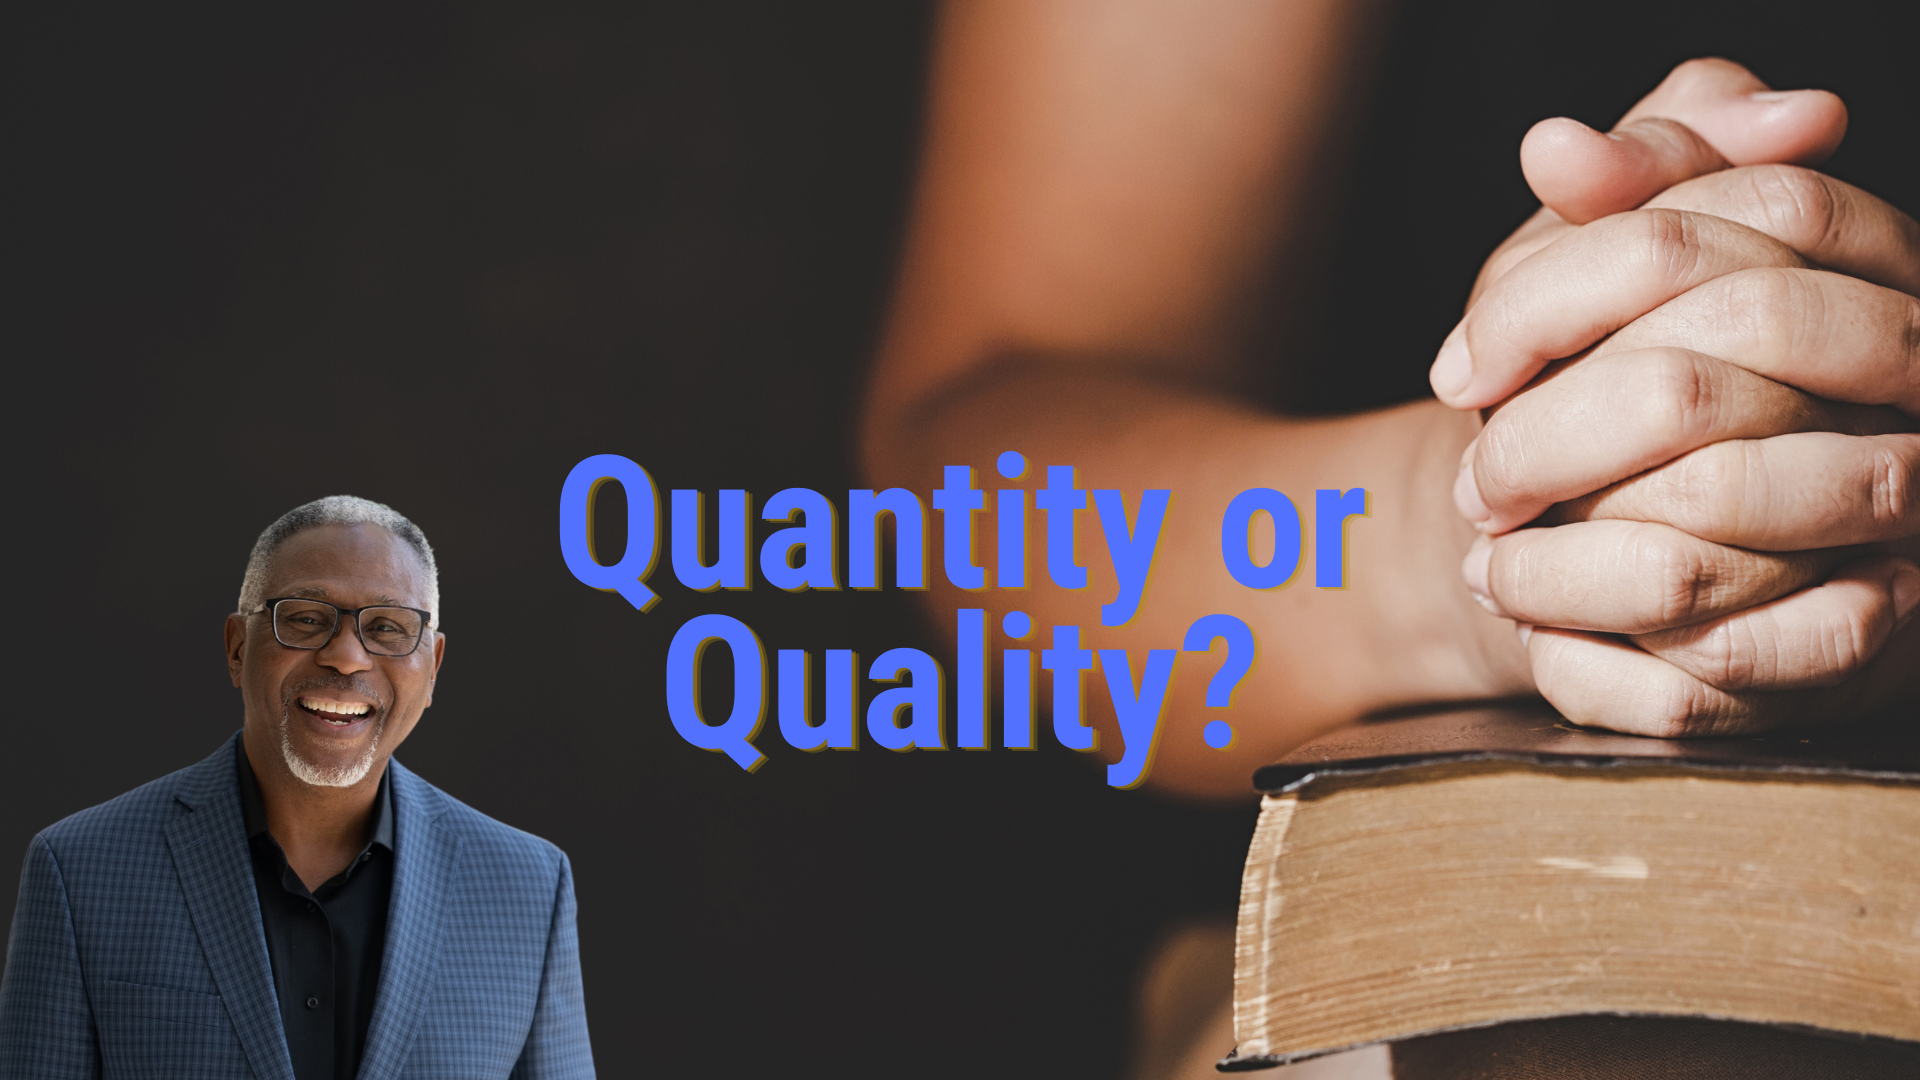 Quantity or Quality? blog featured image